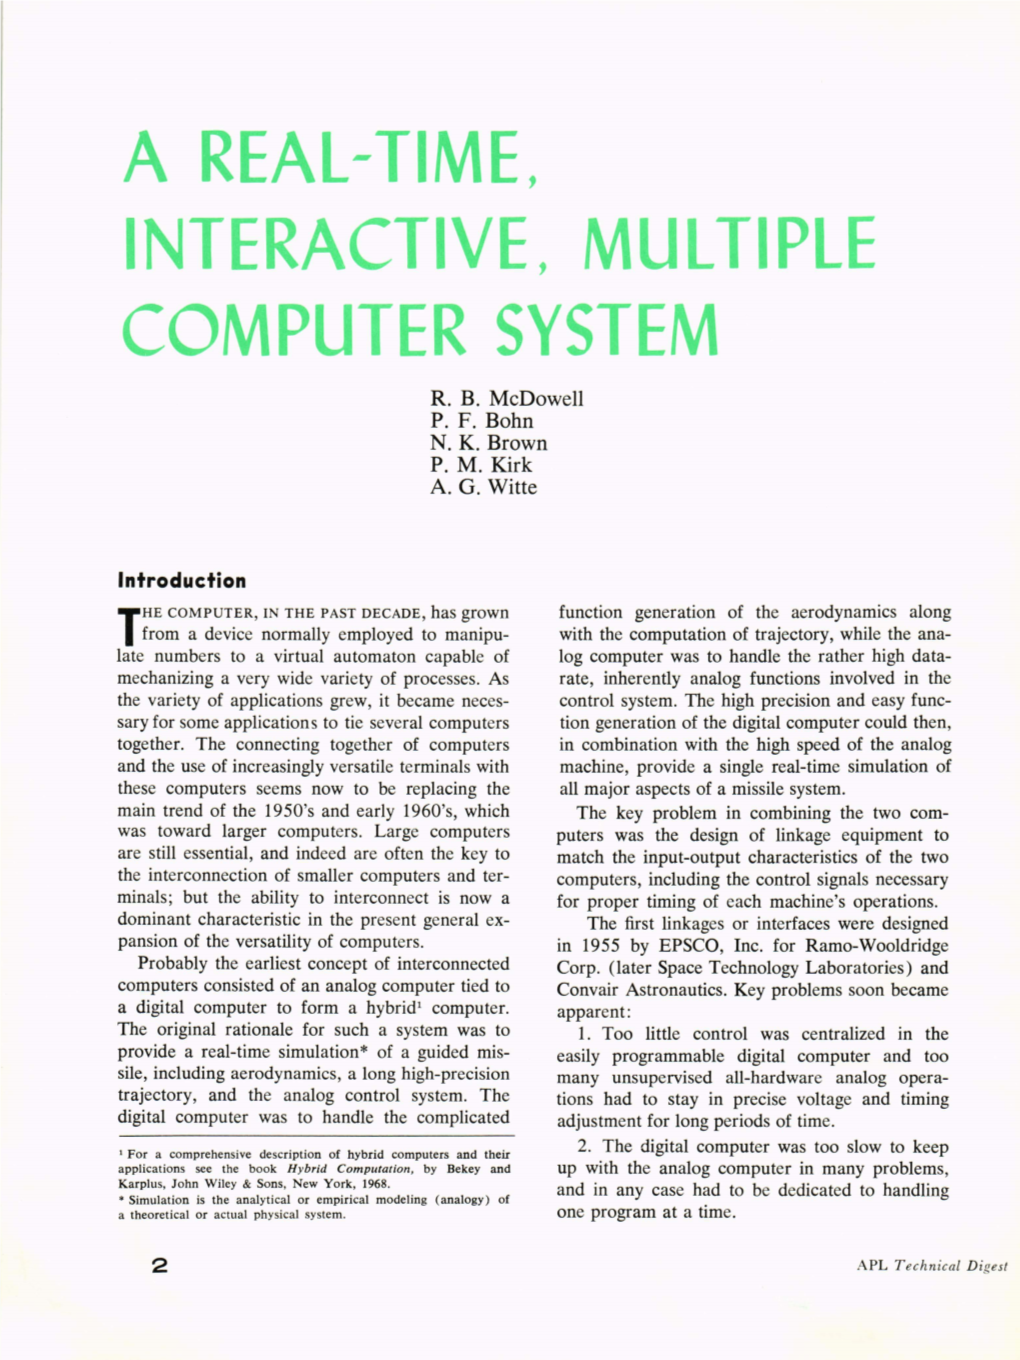 A Real-Time, Interactive, Multiple Computer System